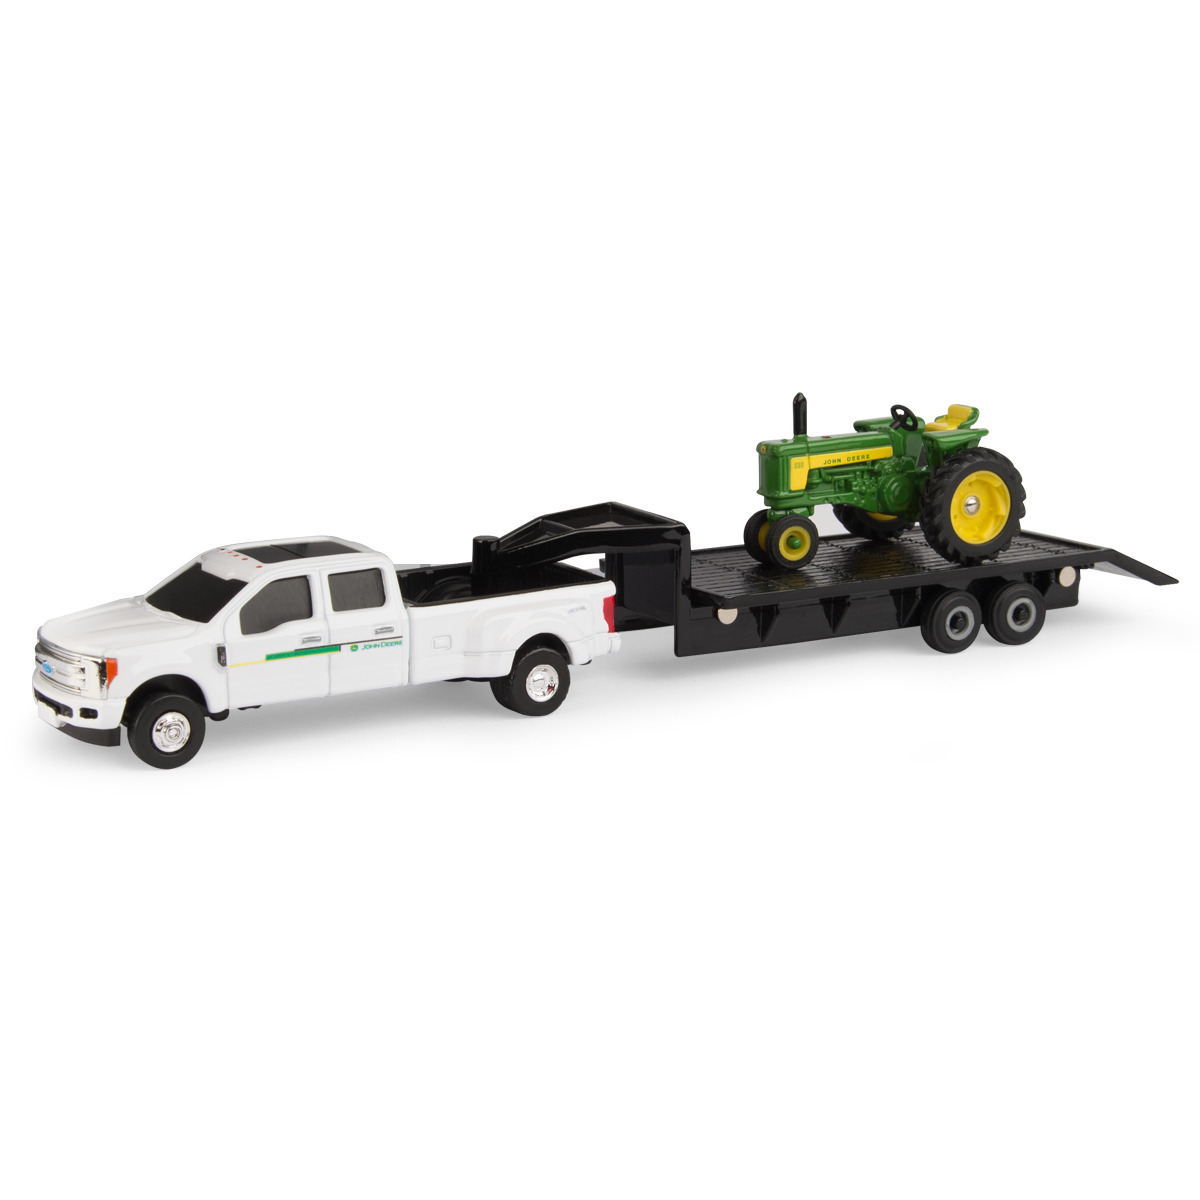 1/64 Scale Truck & Trailer Toy Set